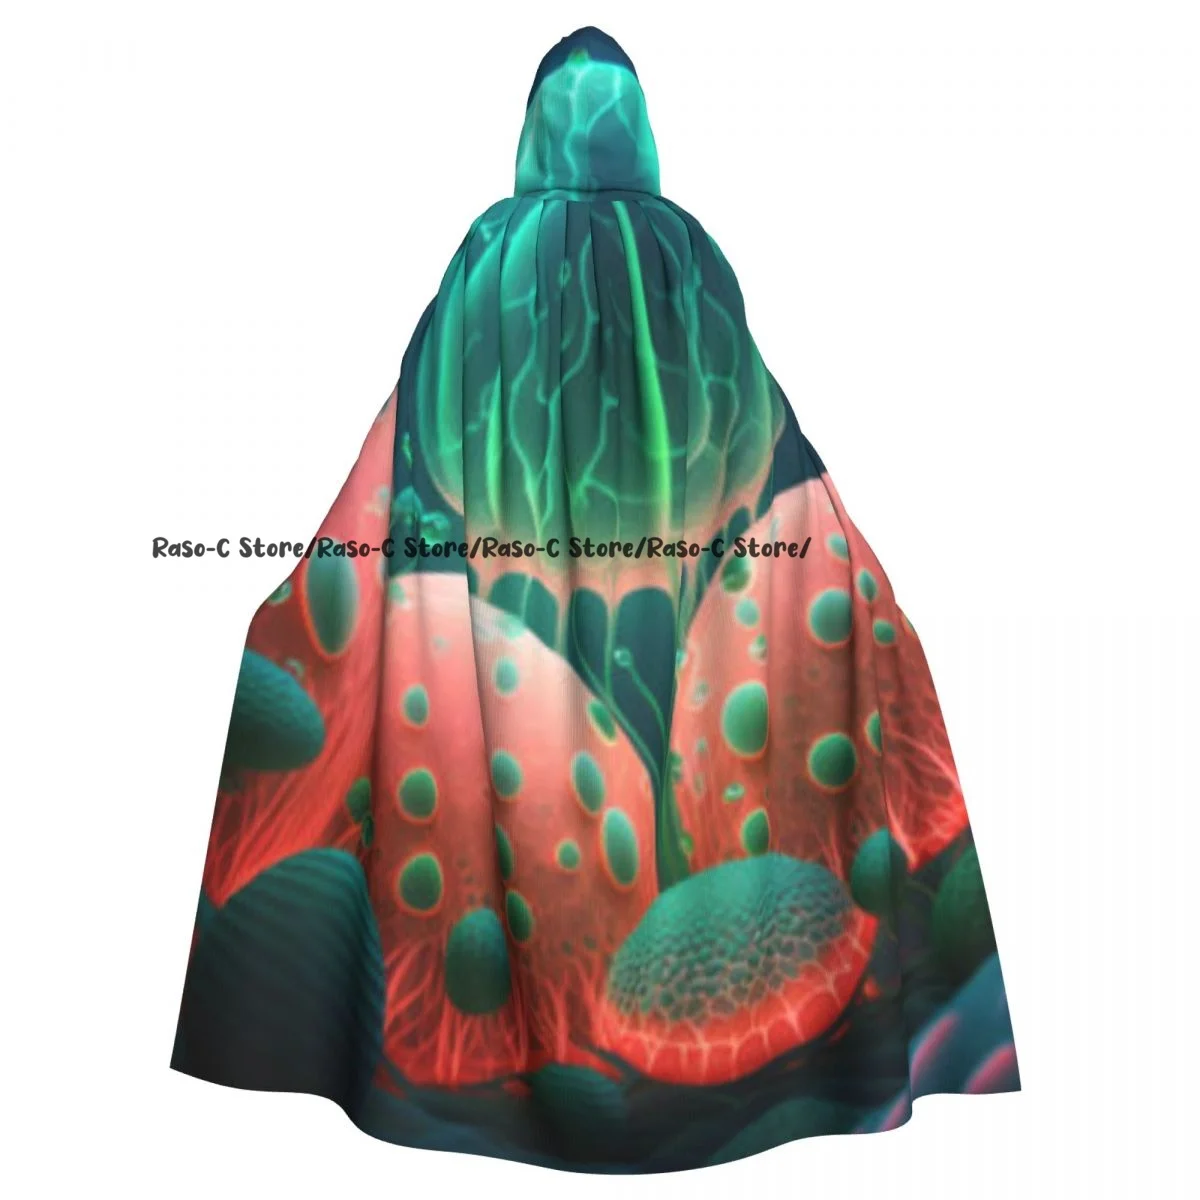 

Unisex Witch Party Reversible Hooded Adult Vampires Cape Cloak Jellyfish Swims In The Ocean Sea